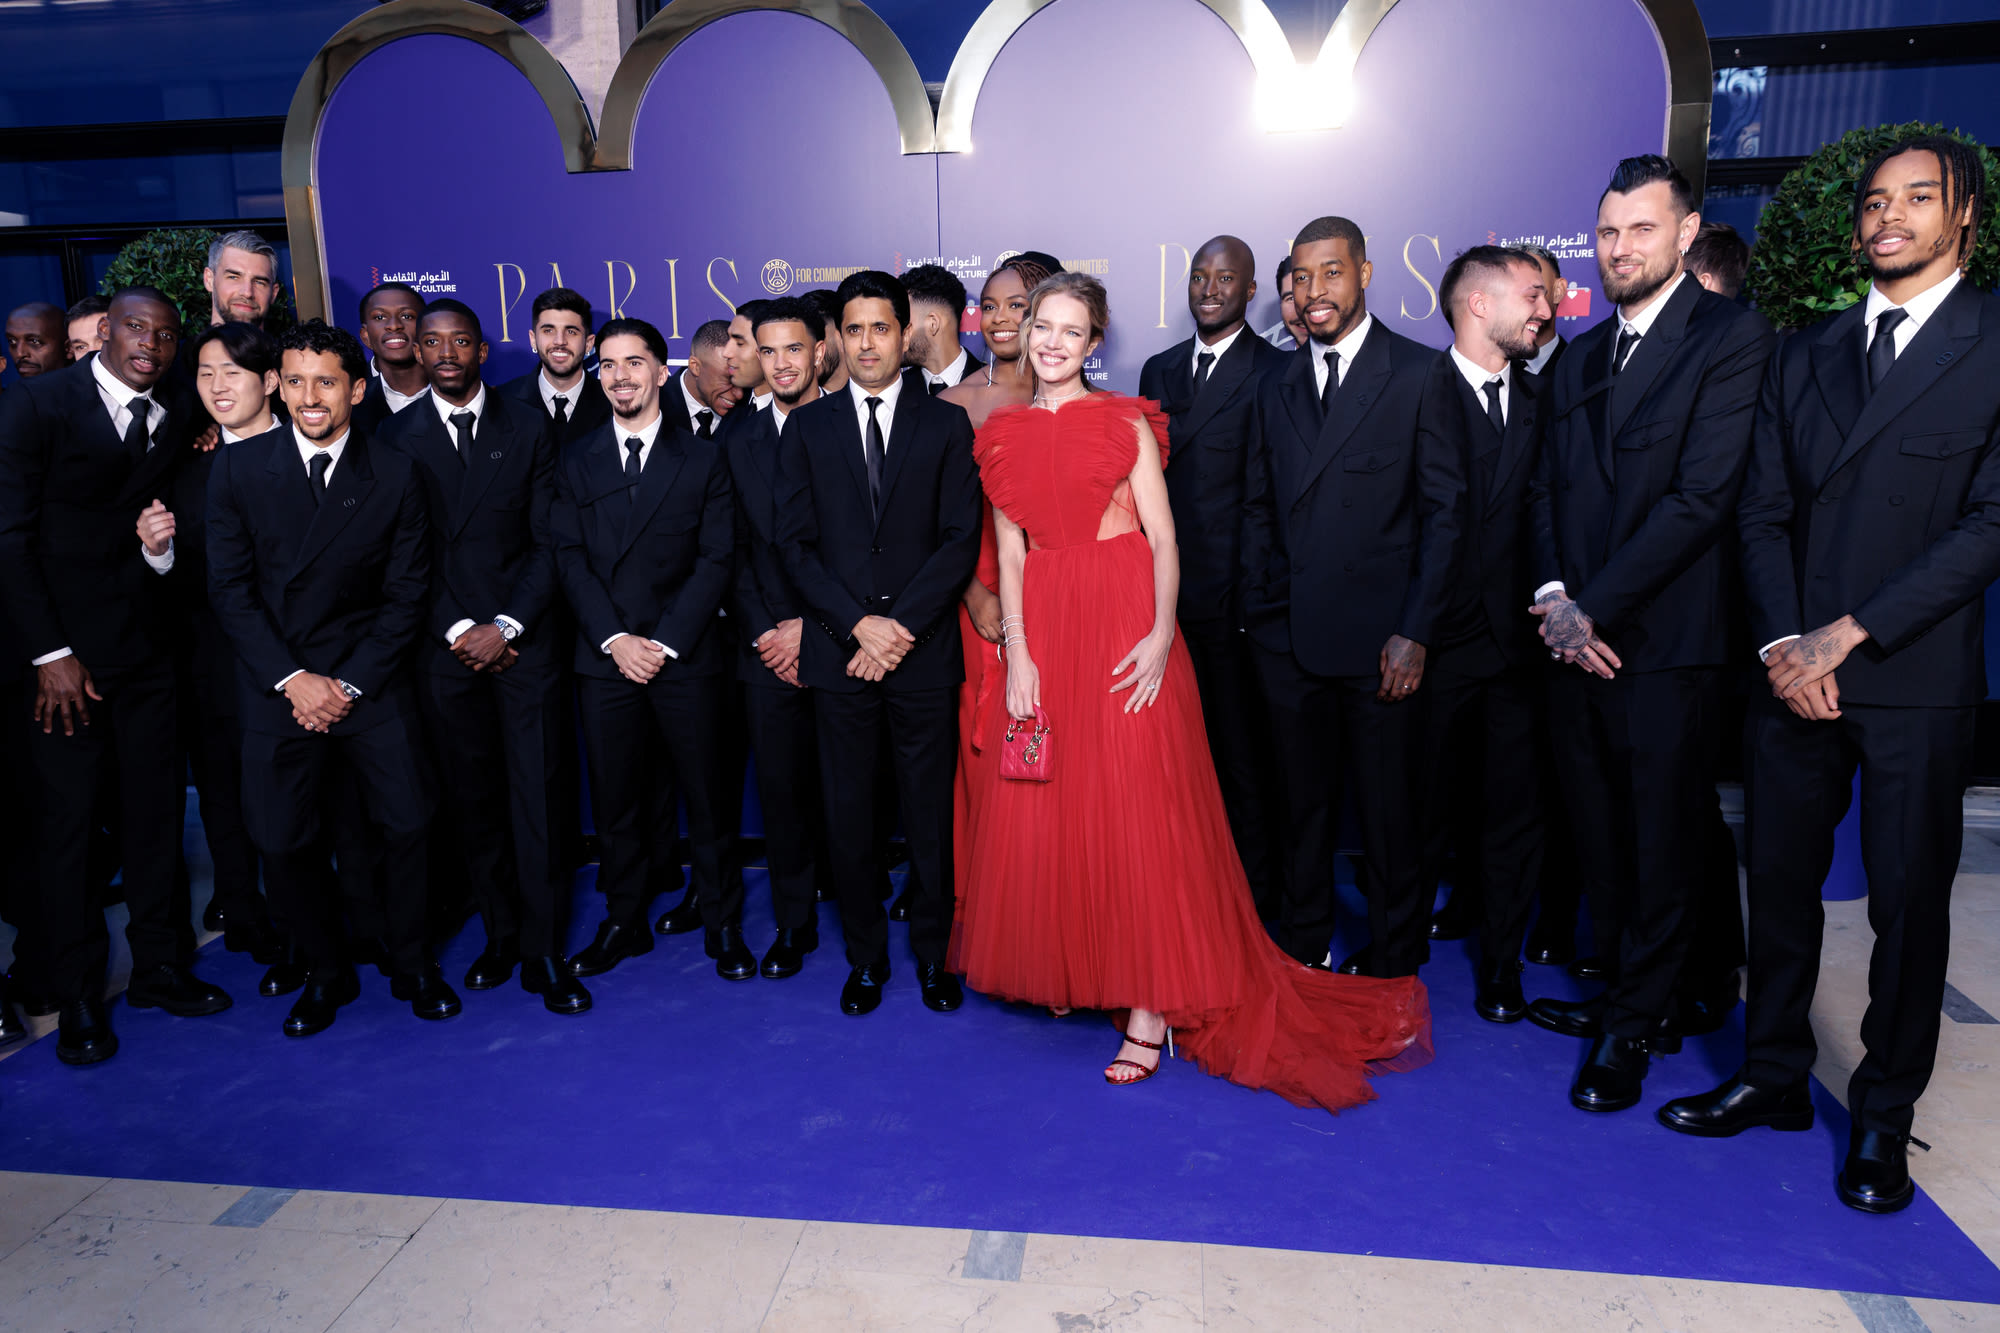 Fashion, Football Worlds Unite in Paris for Special-needs Children